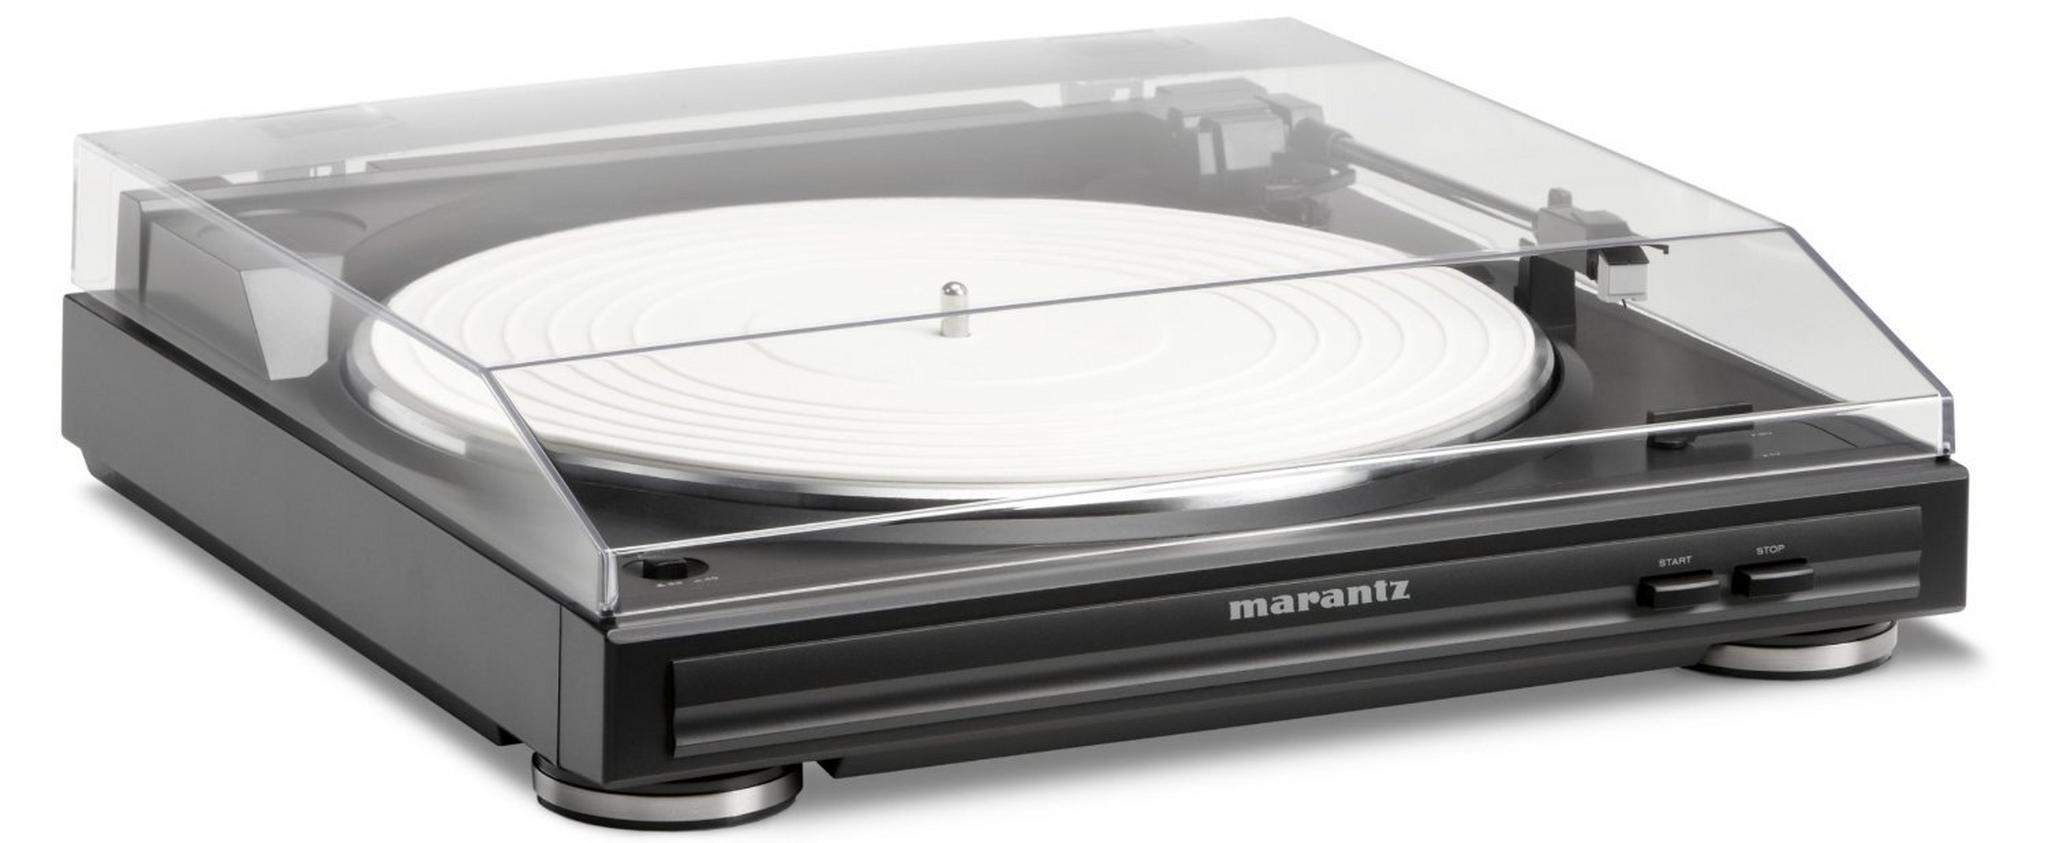 Marantz TT5005 Turntable with Built-In Phono Equalizer